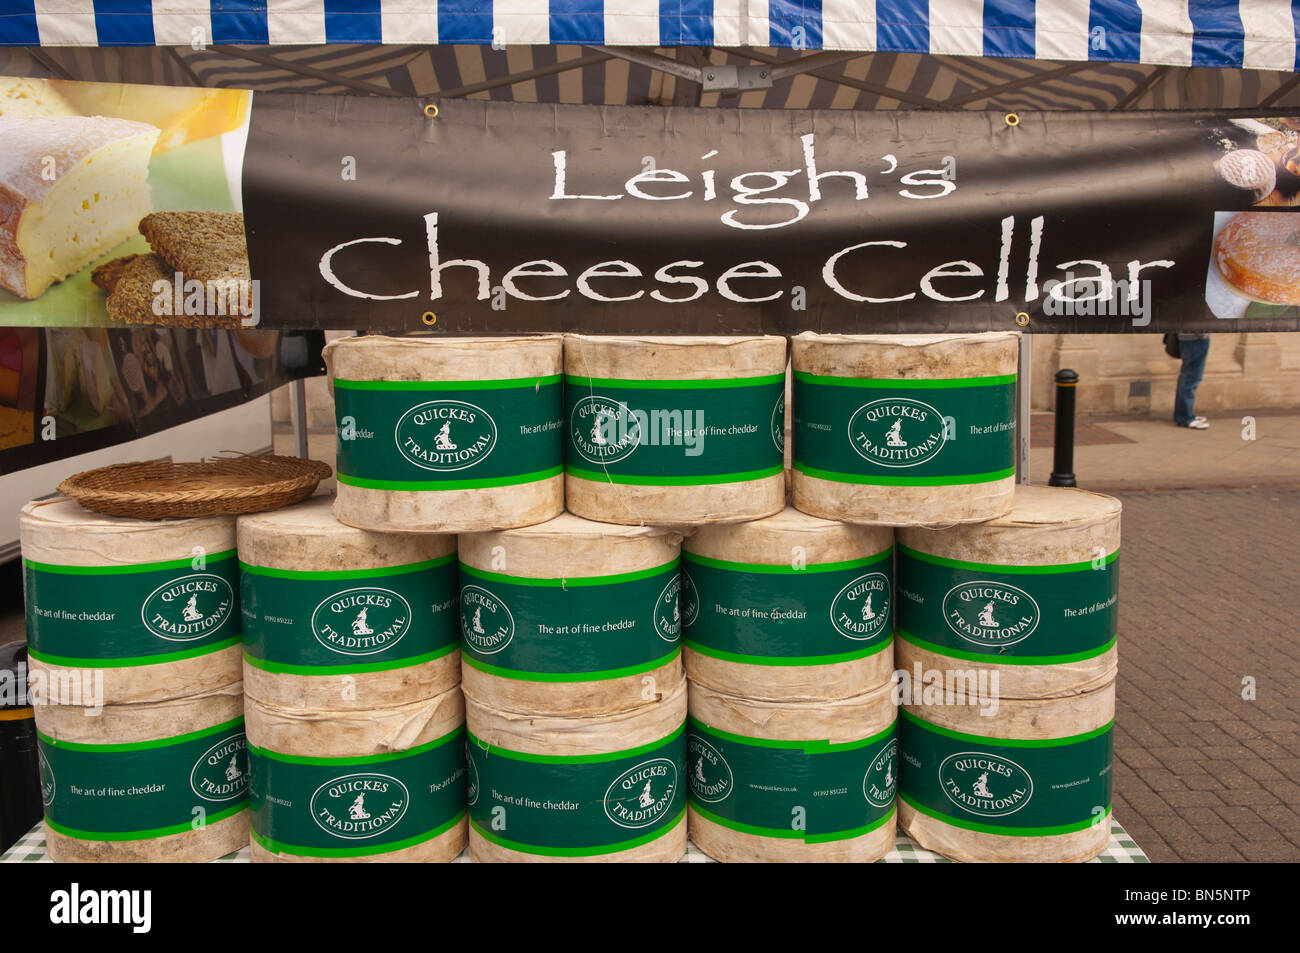 Leigh's cheese cellar sells fine cheddar cheeses in the Uk Stock Photo